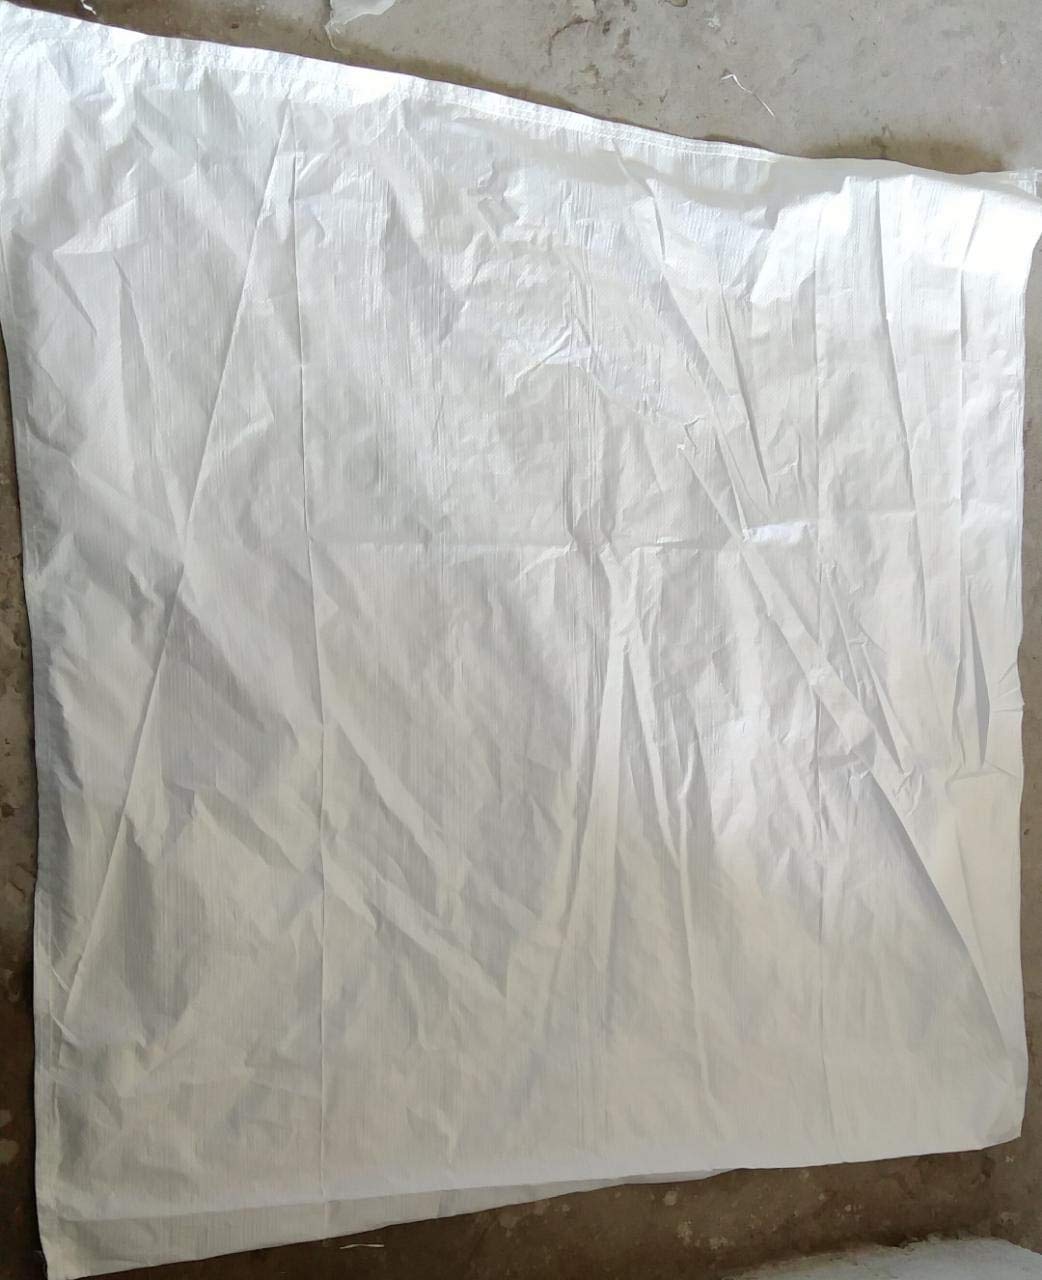 Empty White Big Bora, Large HDPE Bori for Packing of Food, bori Bags Packing Parcels Goods Items (Size 60x65 Inch) (Pack of 10) (36x48 Inch, Set OF 10)